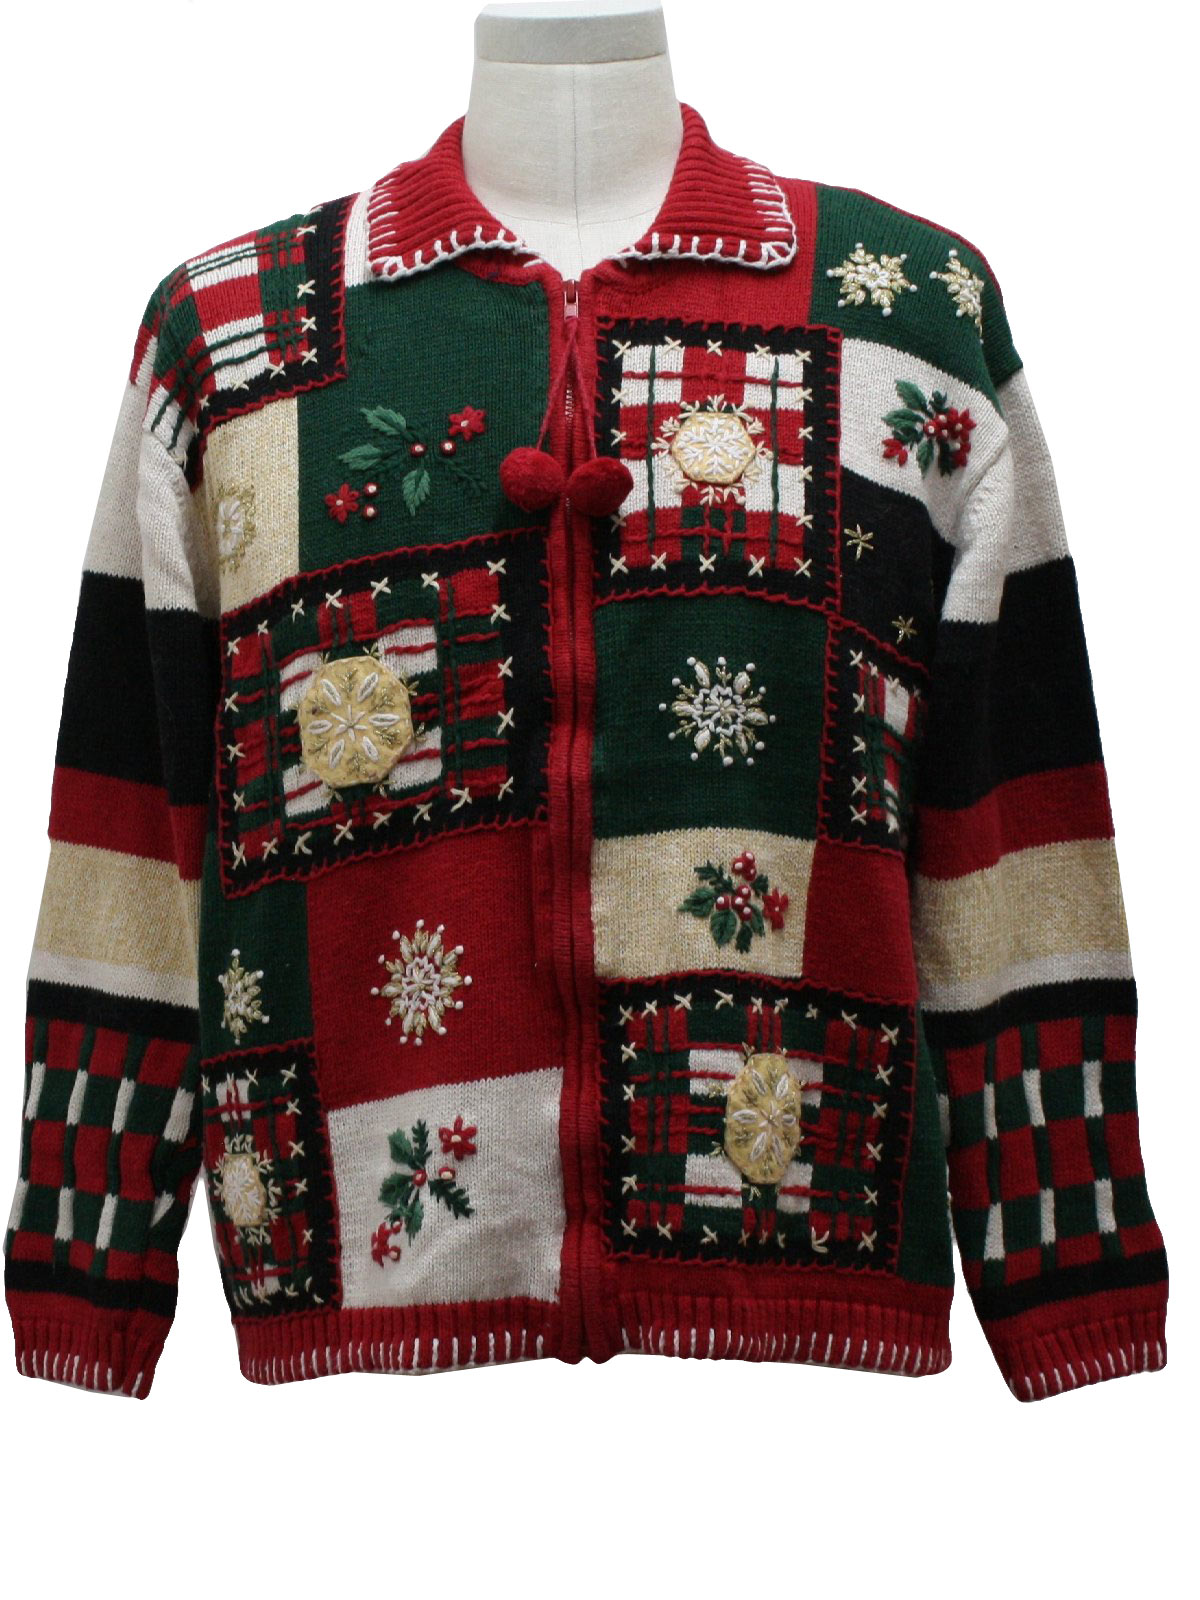 Country Kitsch Ugly Christmas Sweater: -Decorated Originals- Unisex red ...